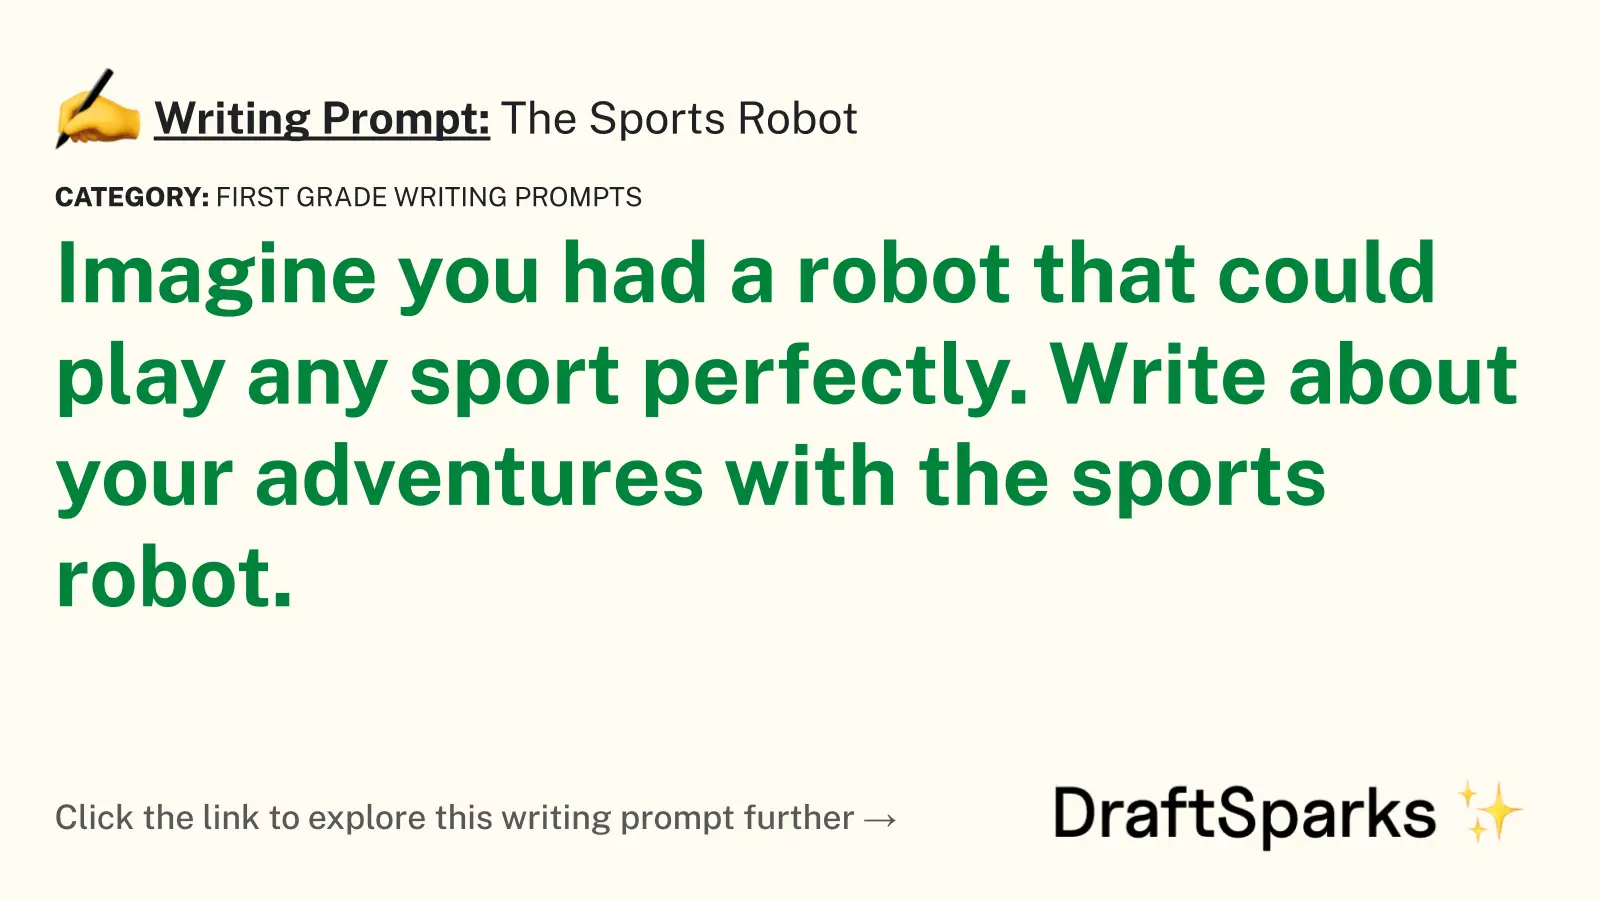 The Sports Robot